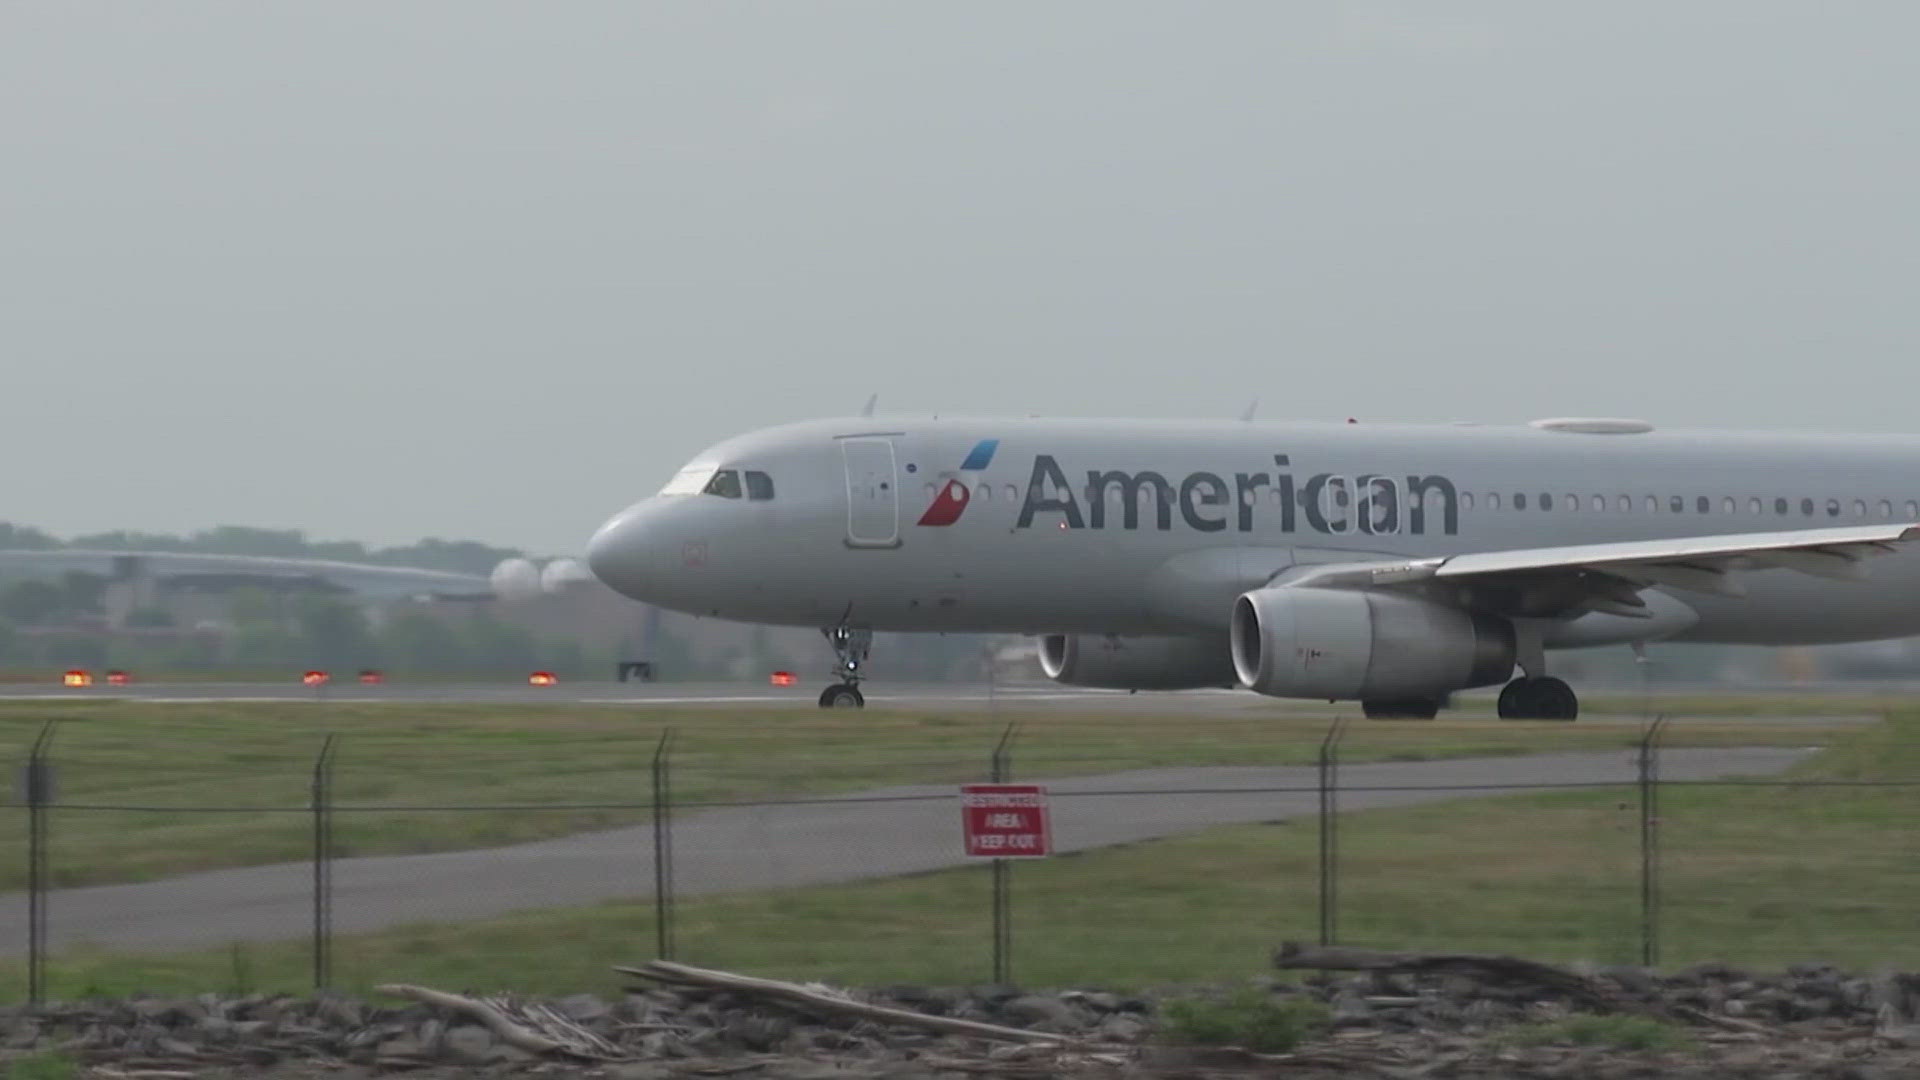 Black passengers who were briefly ordered off an American Airlines plane in January sued the airline, alleging that they were victims of racial discrimination.